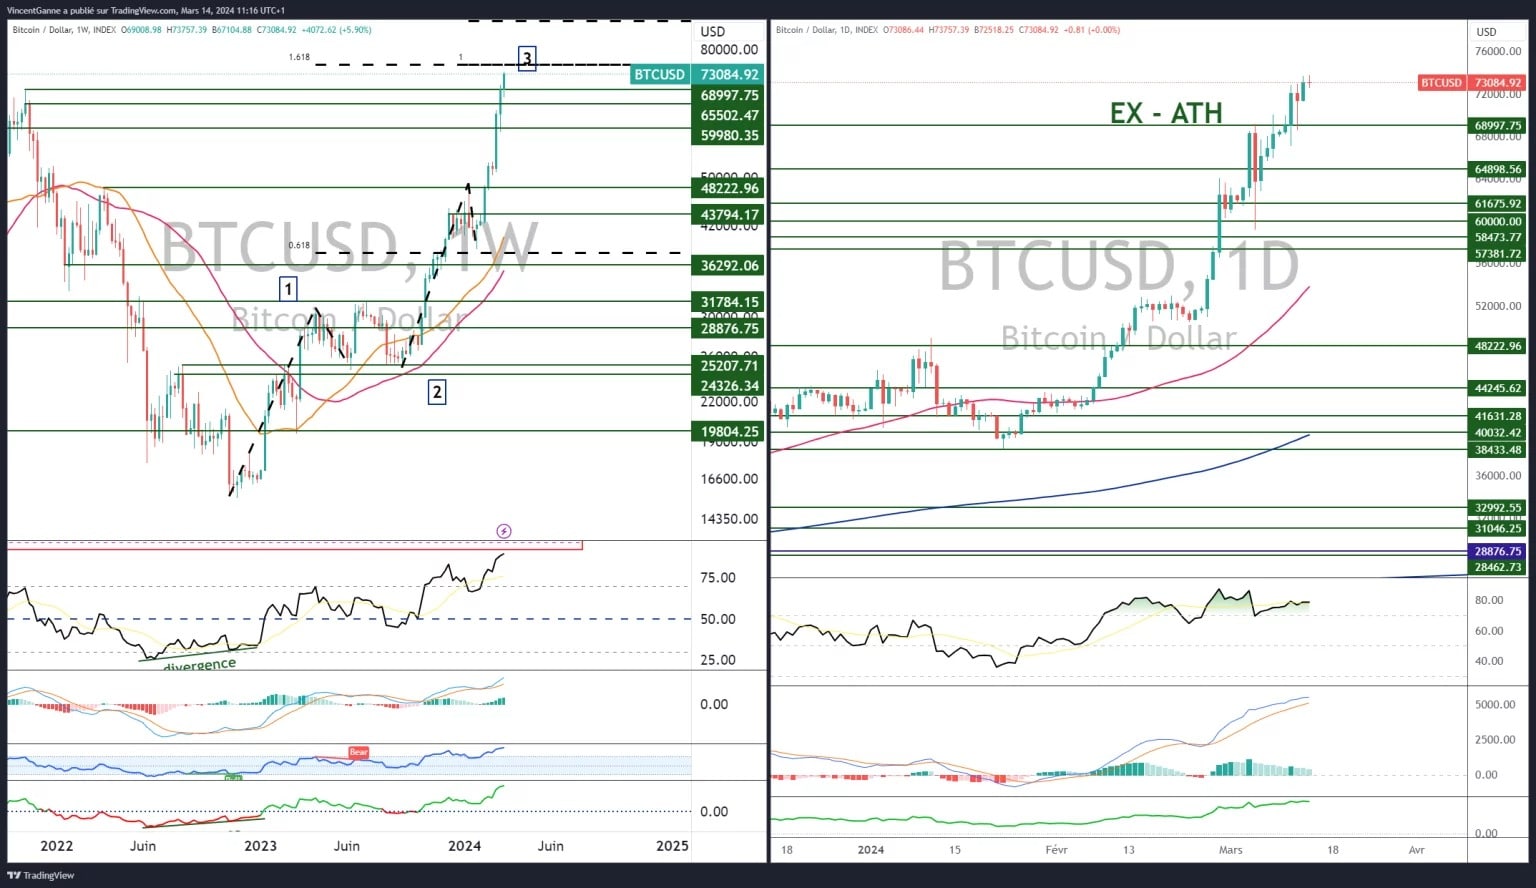 Chart showing weekly (left) and daily (right) Japanese candlesticks for BTC/USD